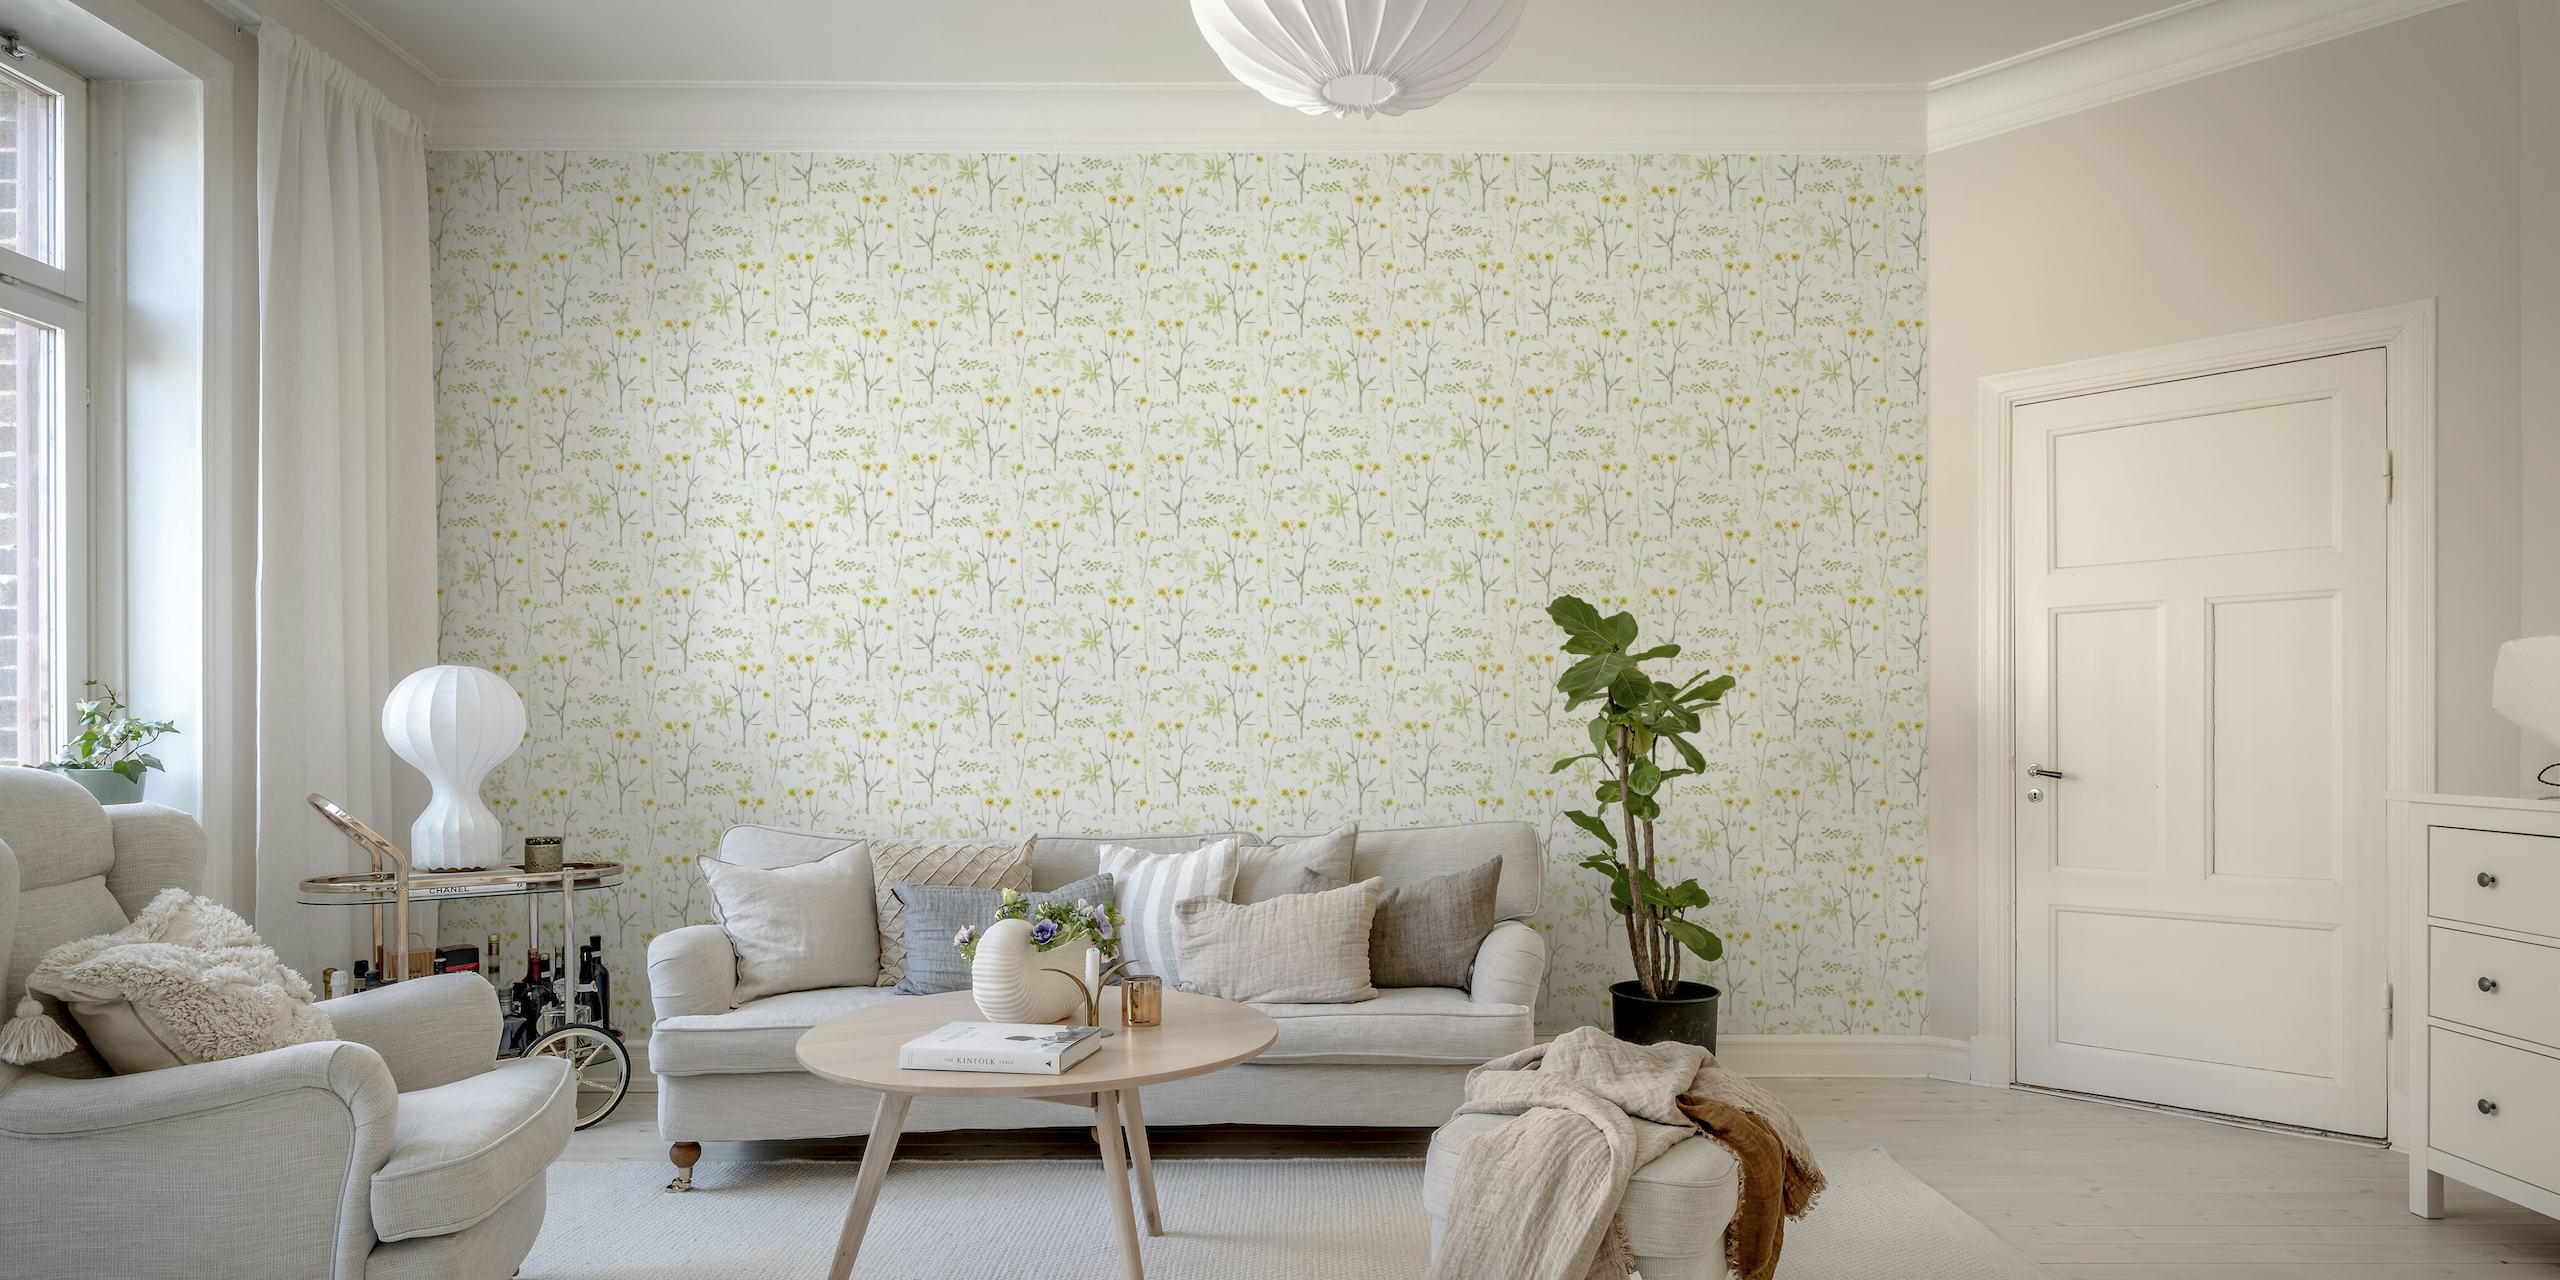 Tranquil flower field wall mural with soft pastel tones and a sense of natural elegance